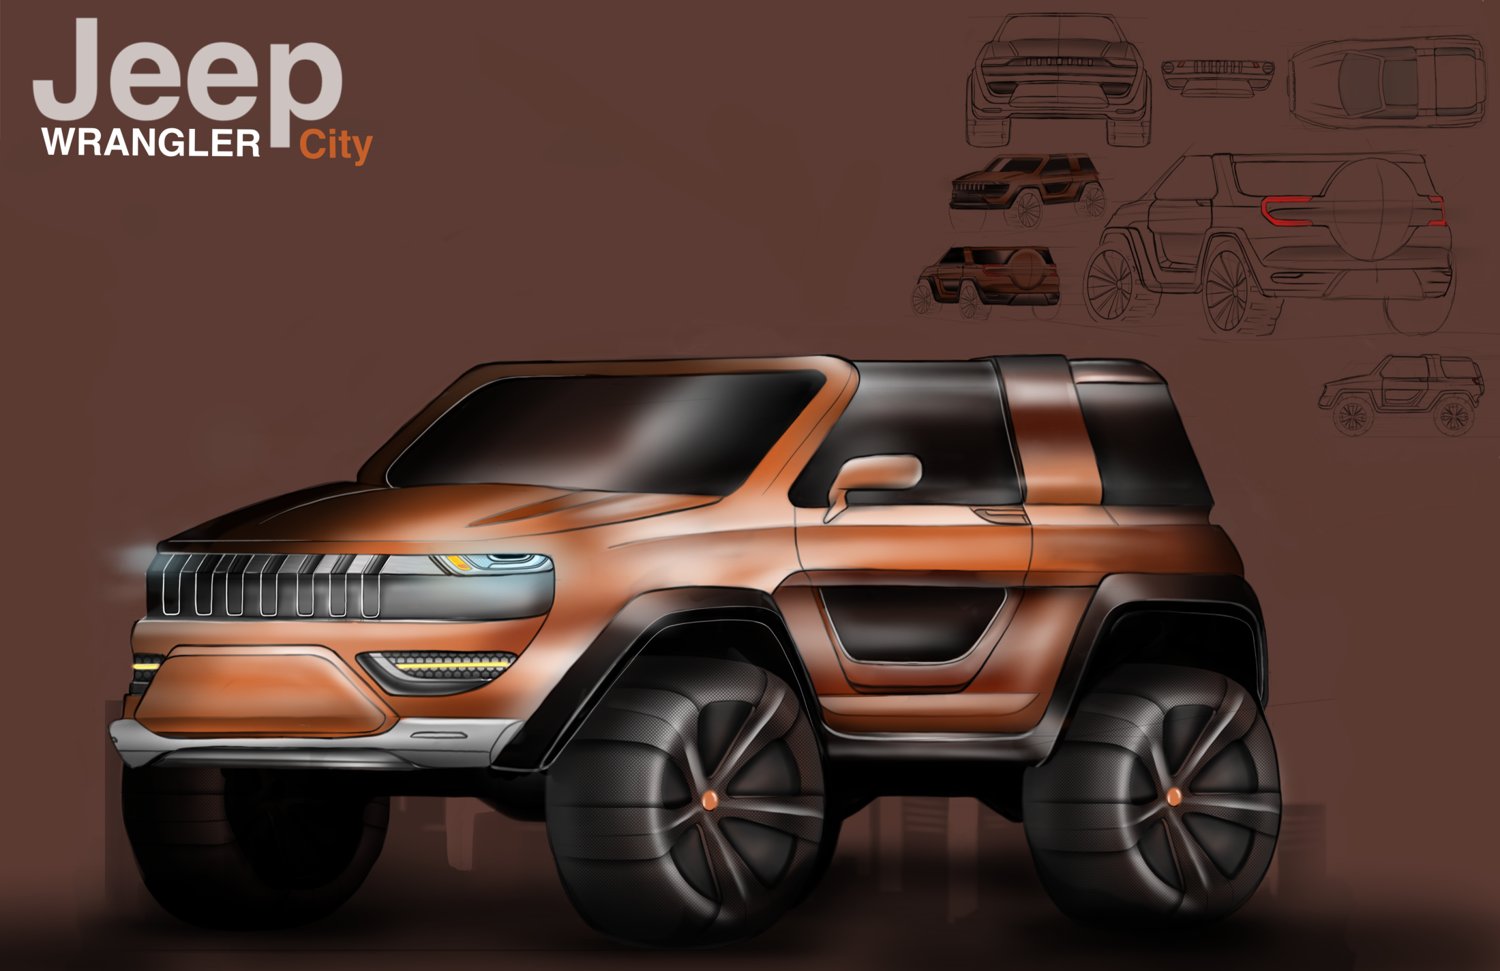 Stellantis North America auf Twitter: „12 years into the future, but still  unmistakably @Jeep®. Here are some designs from high school students of  their vision for the 2030 Jeep #Wrangler in the #